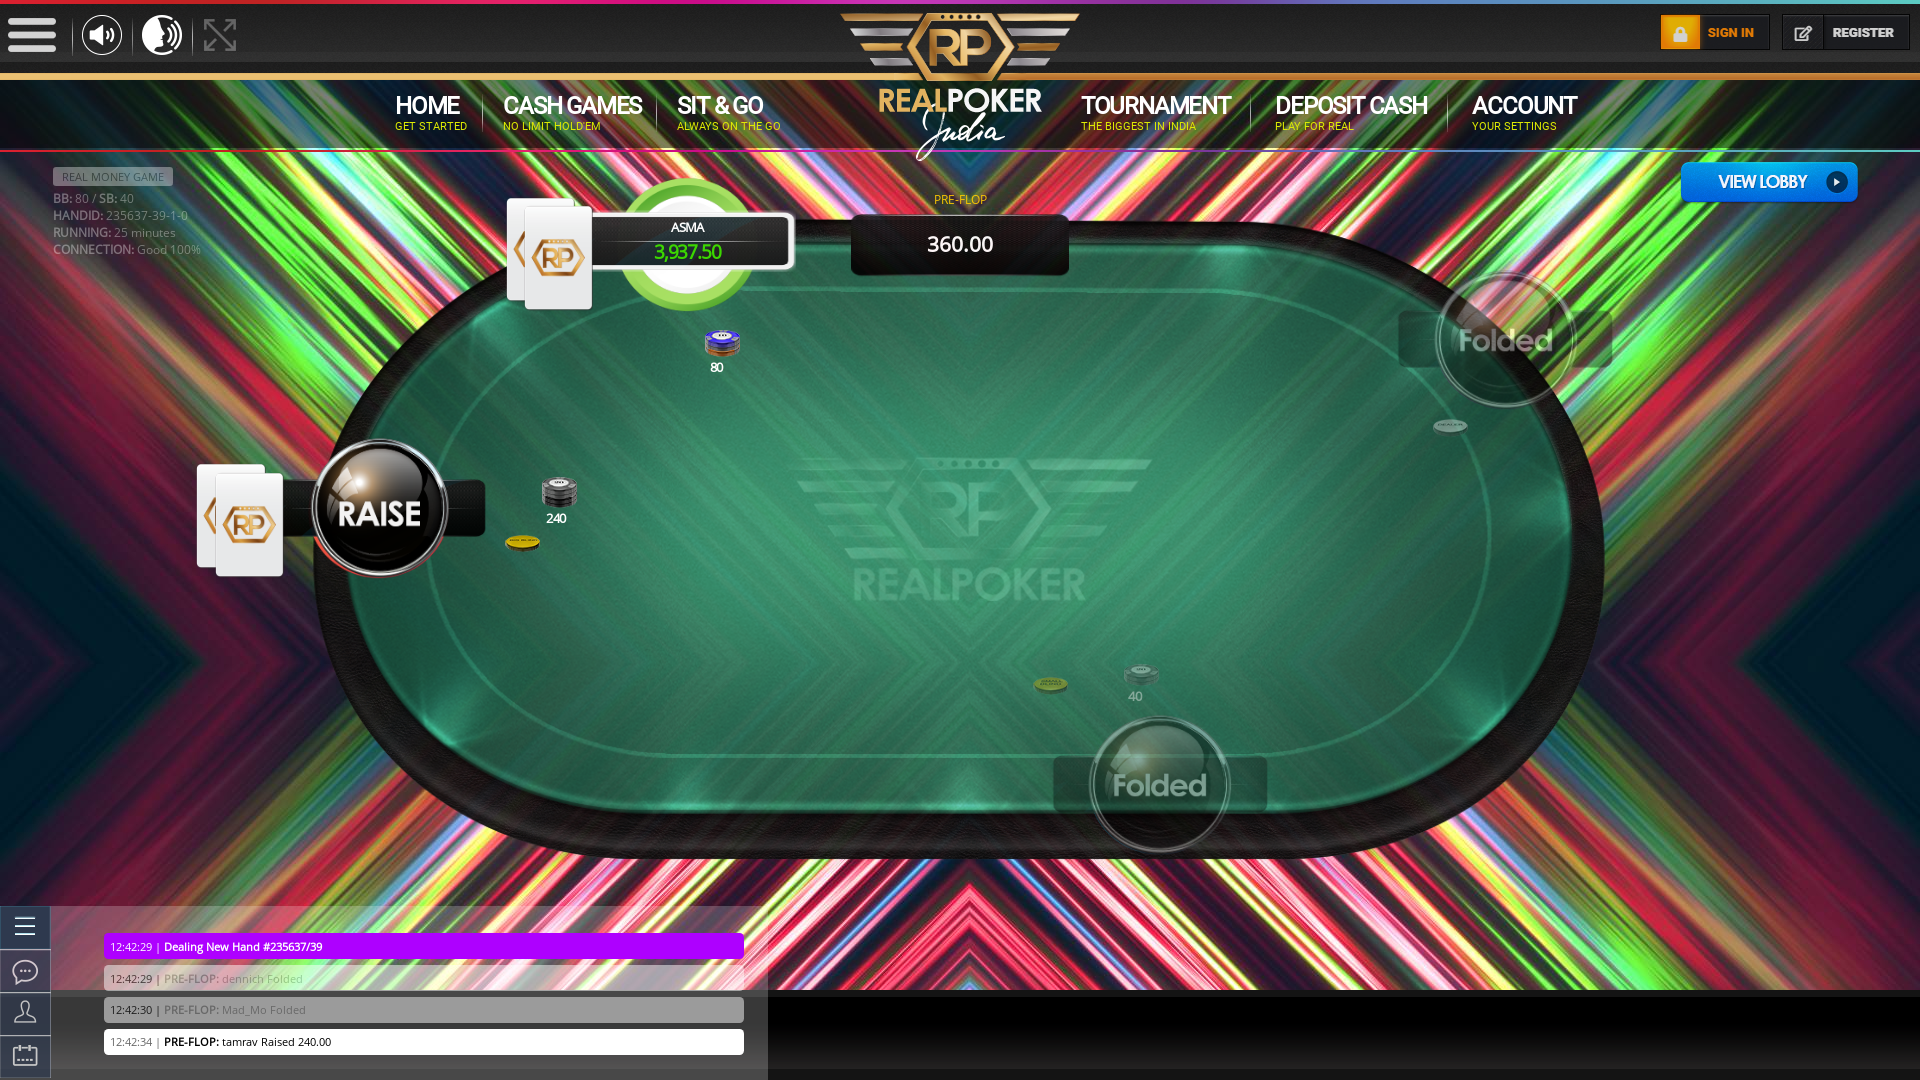 Indian online poker on a 10 player table in the 25th minute match up